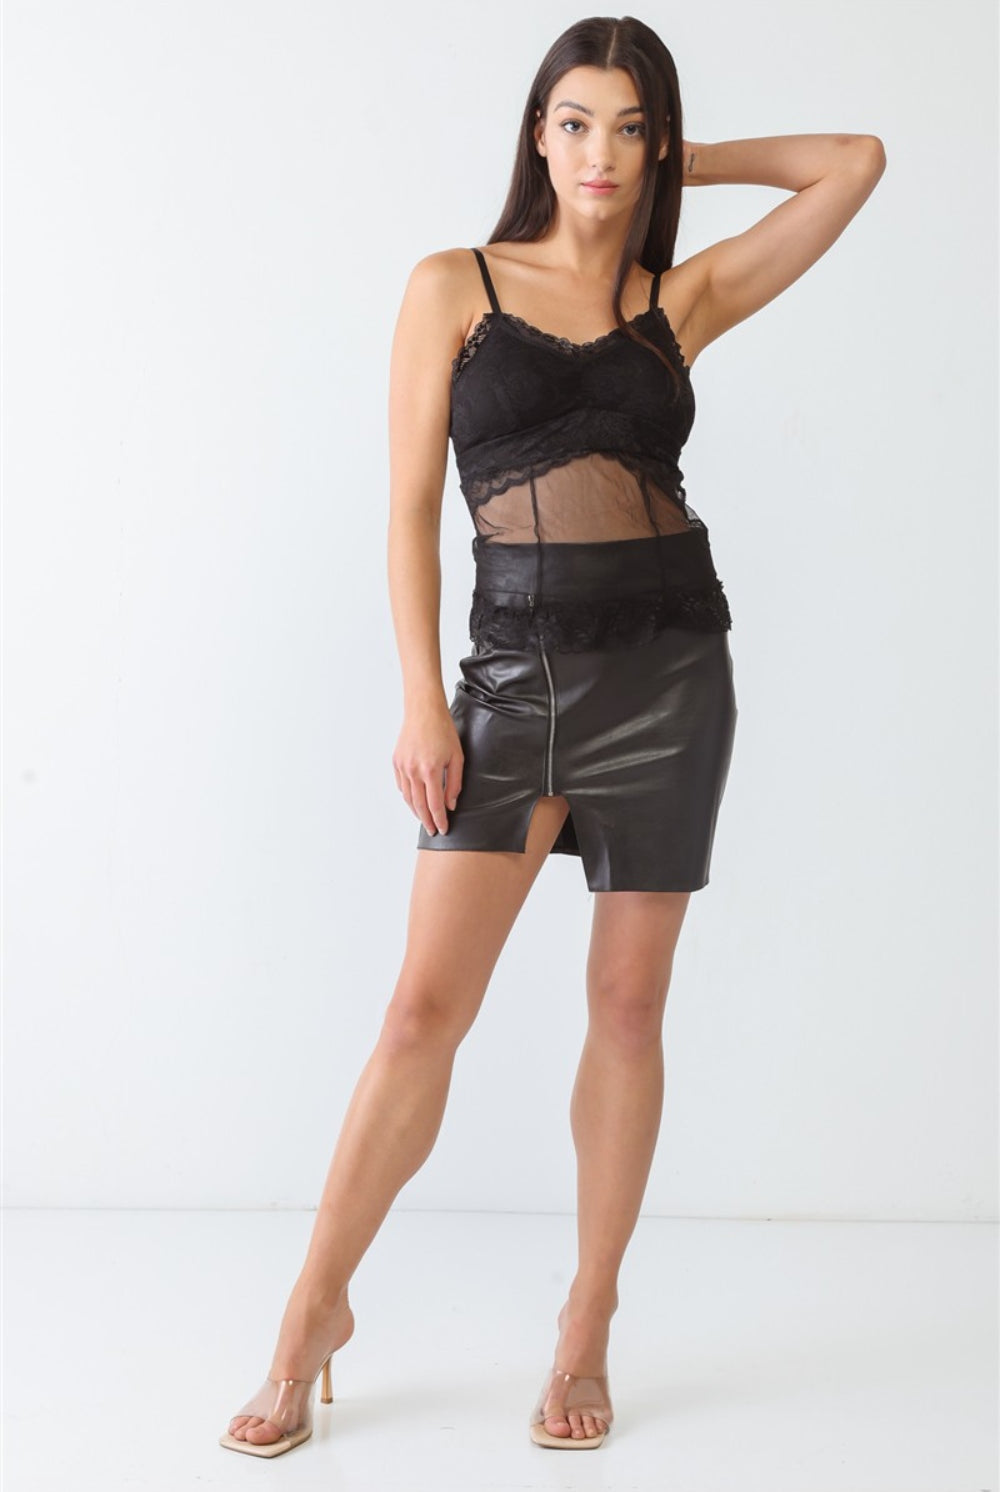 A woman models a sophisticated black lace bustier top with sheer panel detailing, epitomizing modern elegance.